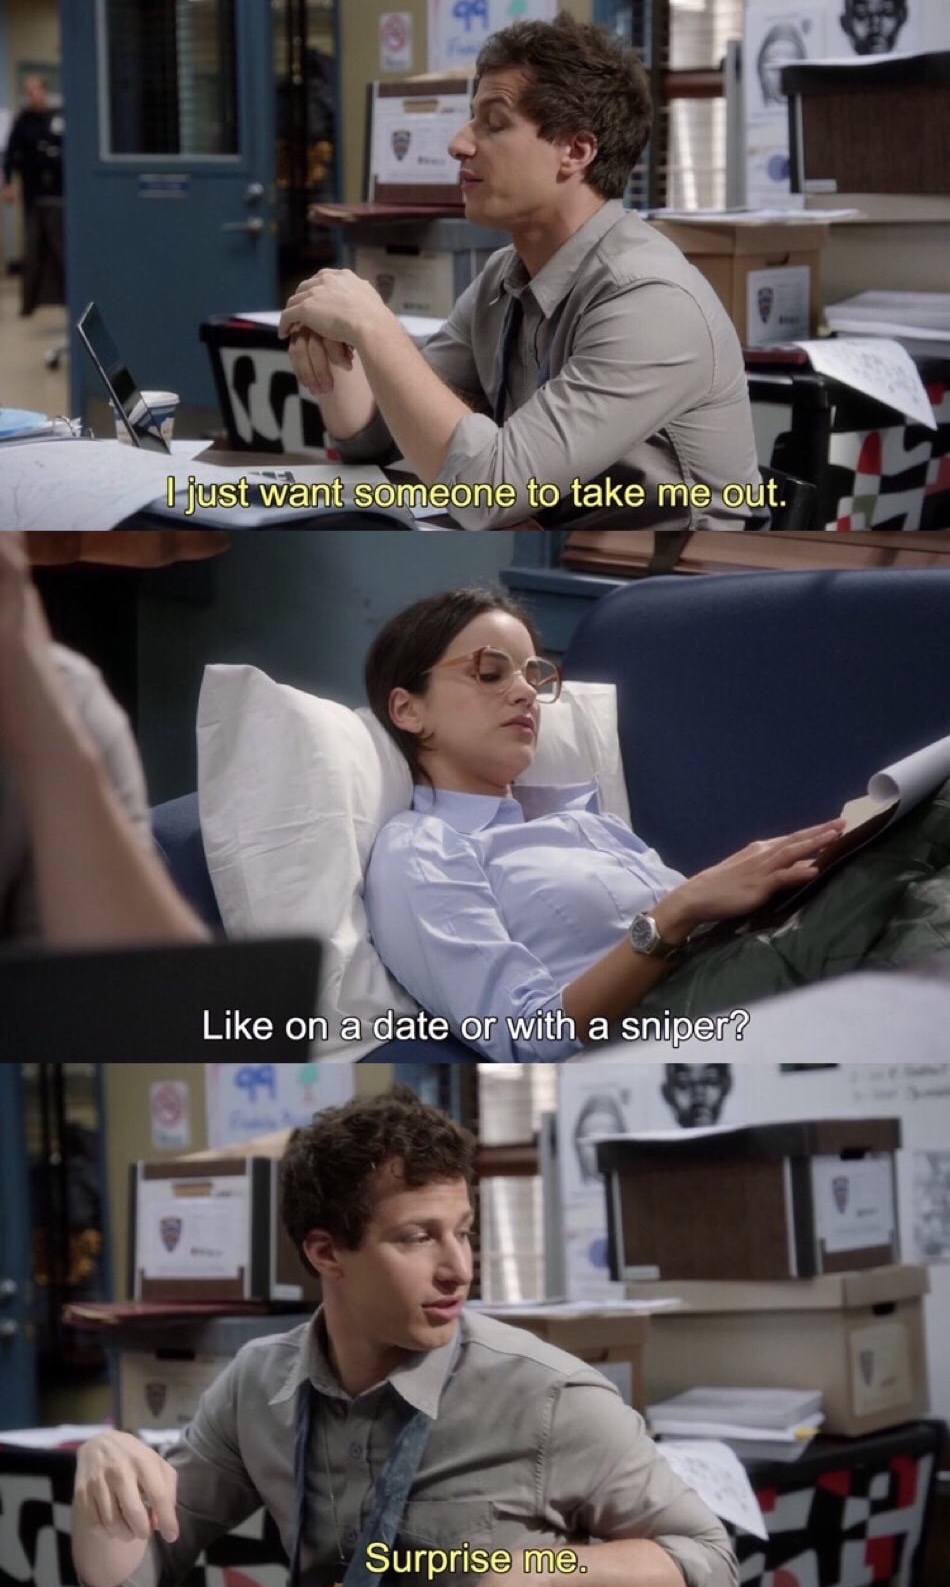 Brooklyn 99 meme about just wanting to be taken out either for dinner or with a sniper